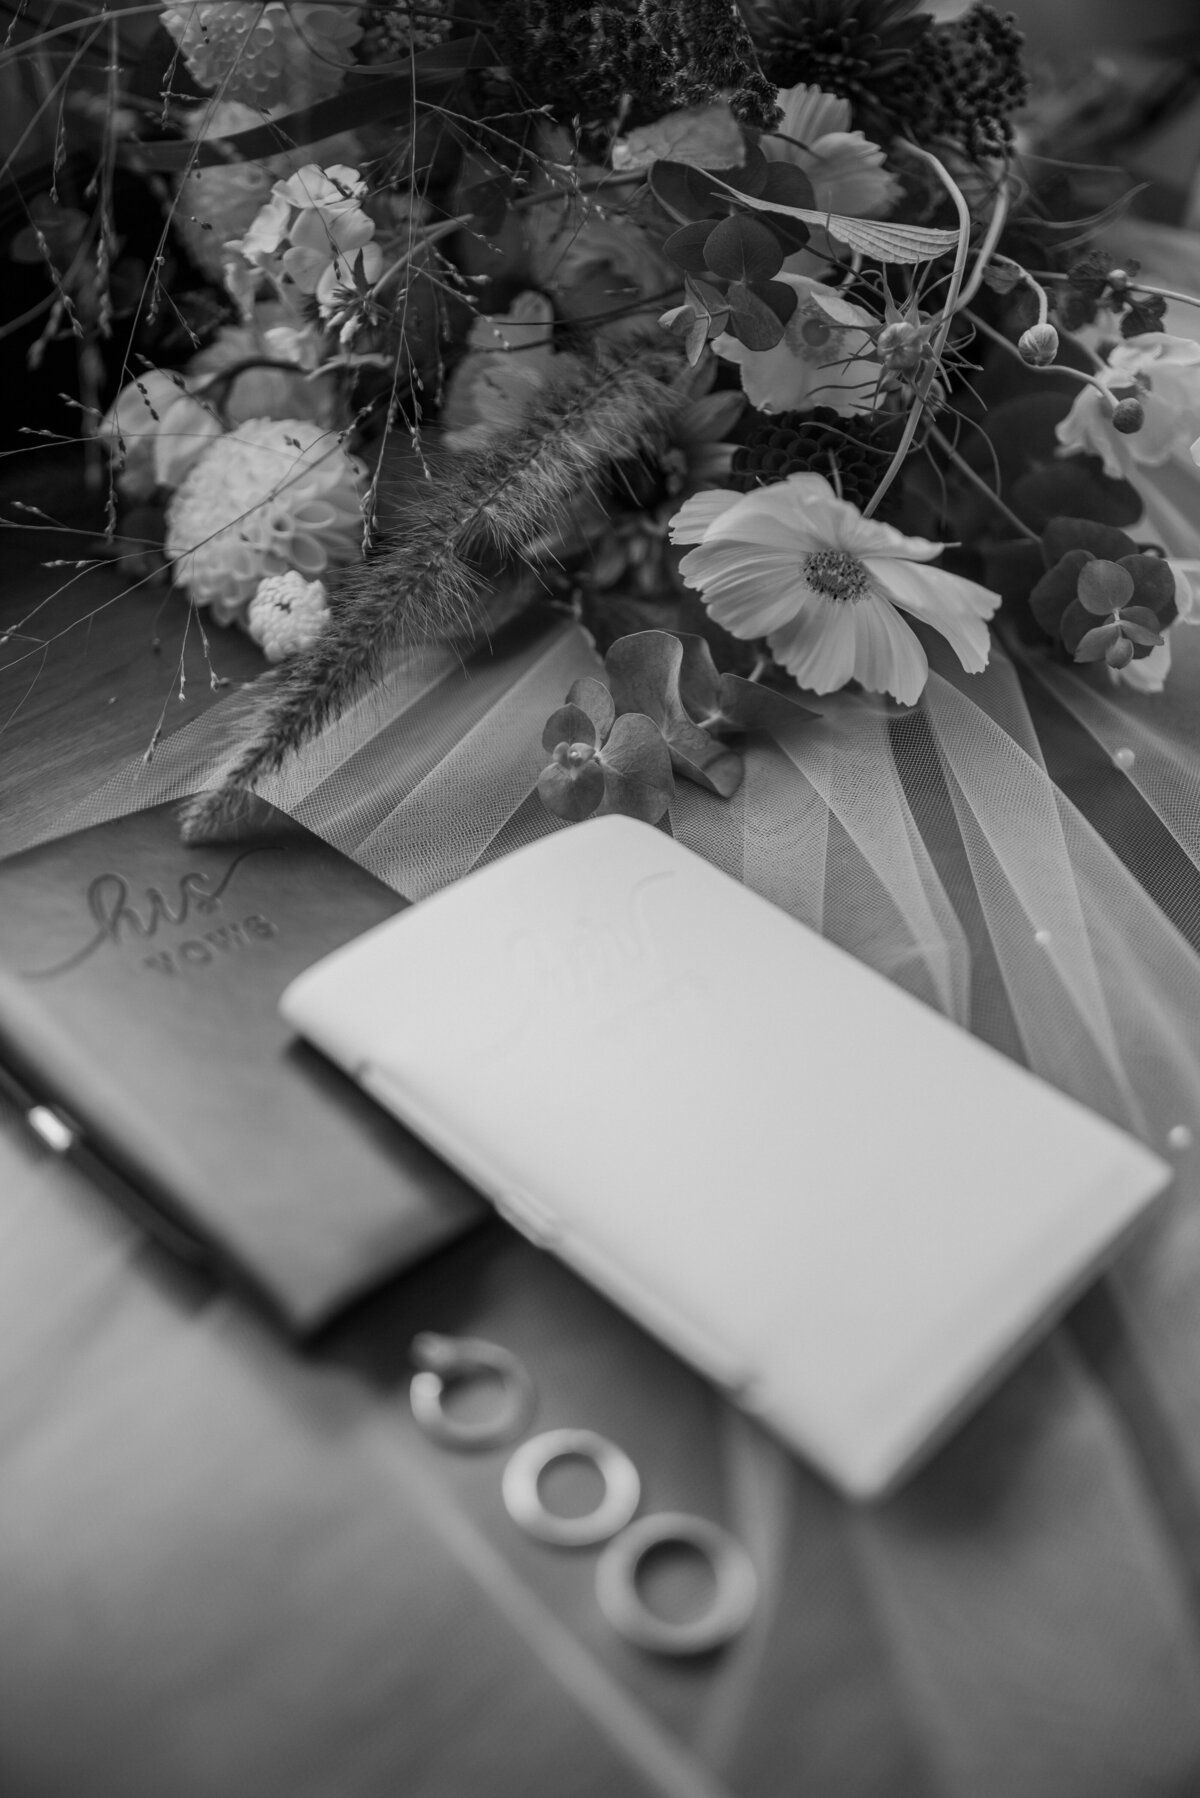 vows book with rings on the table